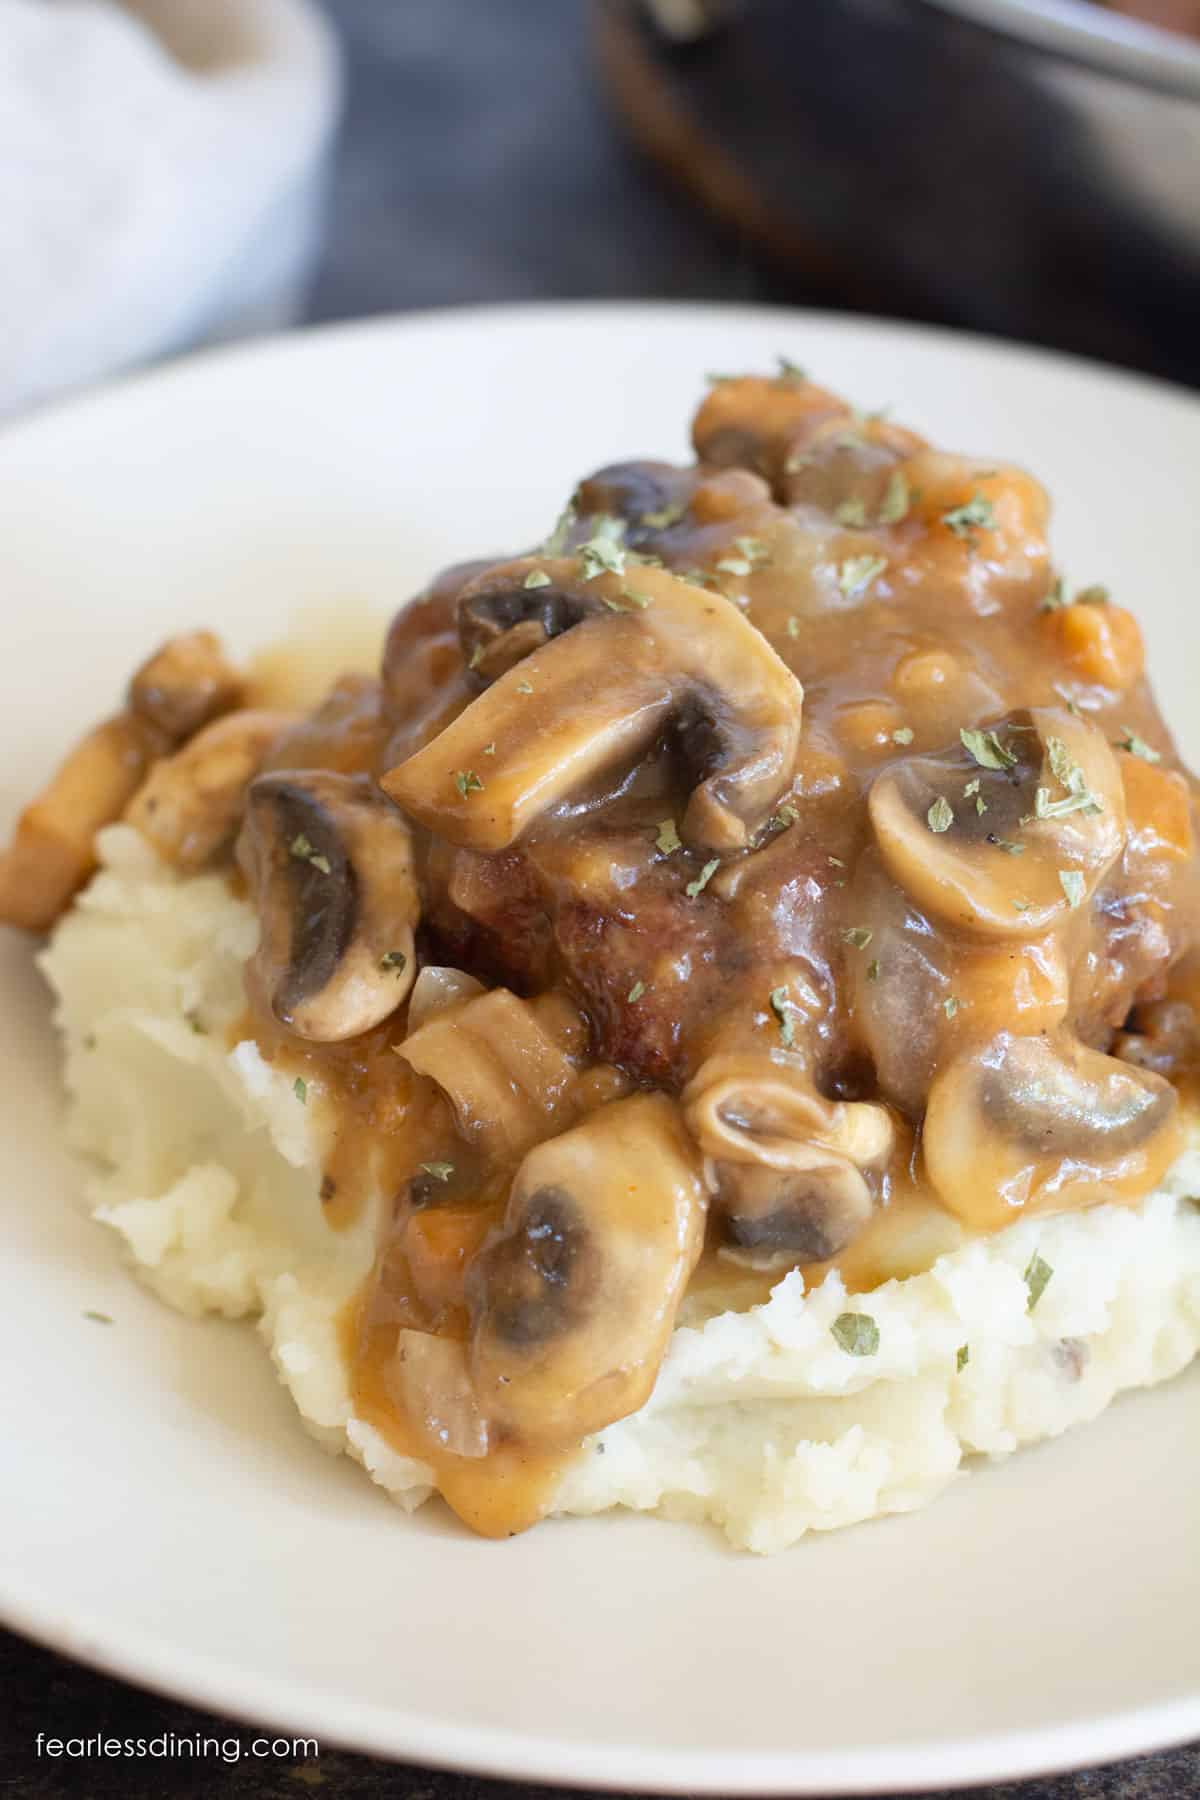 A serving of salisbury steak over mashed potatoes.